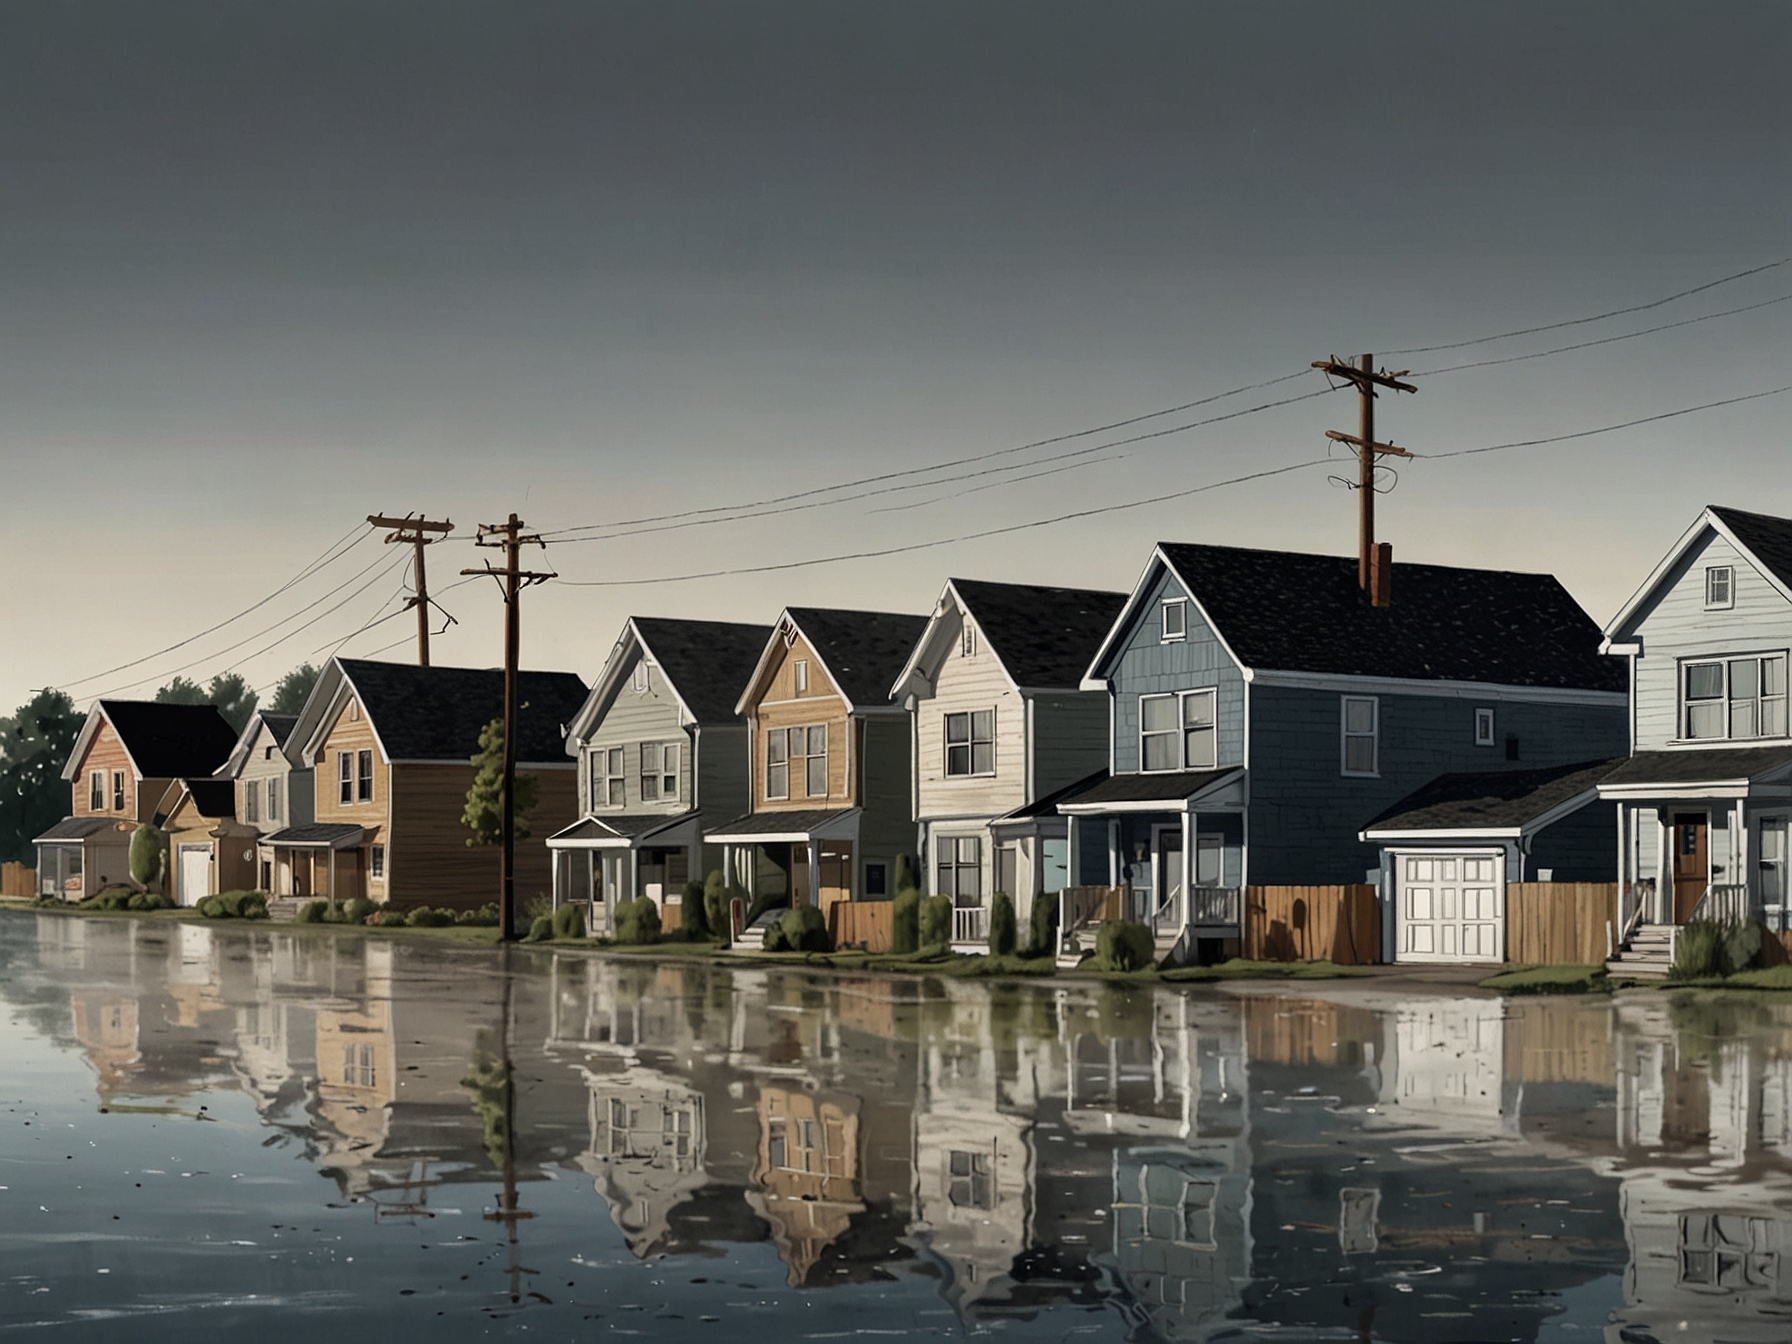 A suburban neighborhood with rising floodwaters encroaching on homes and streets, demonstrating the increasing insurance premiums and housing costs due to properties being in high-risk flood zones.